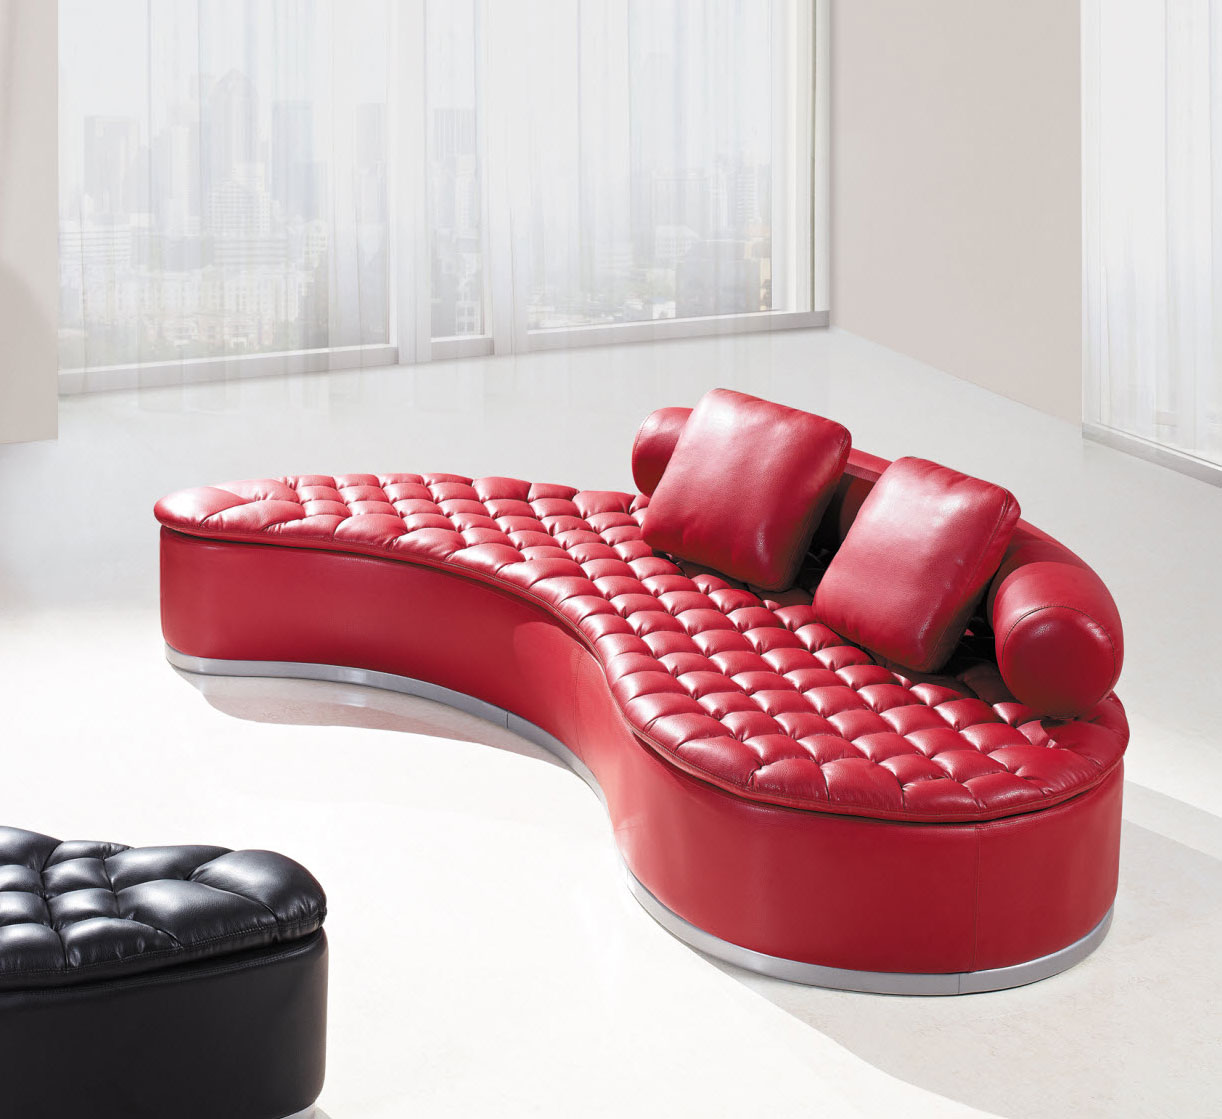 Global Furniture USA A005 Sofa - Red with Red Pillows - Bonded Leather